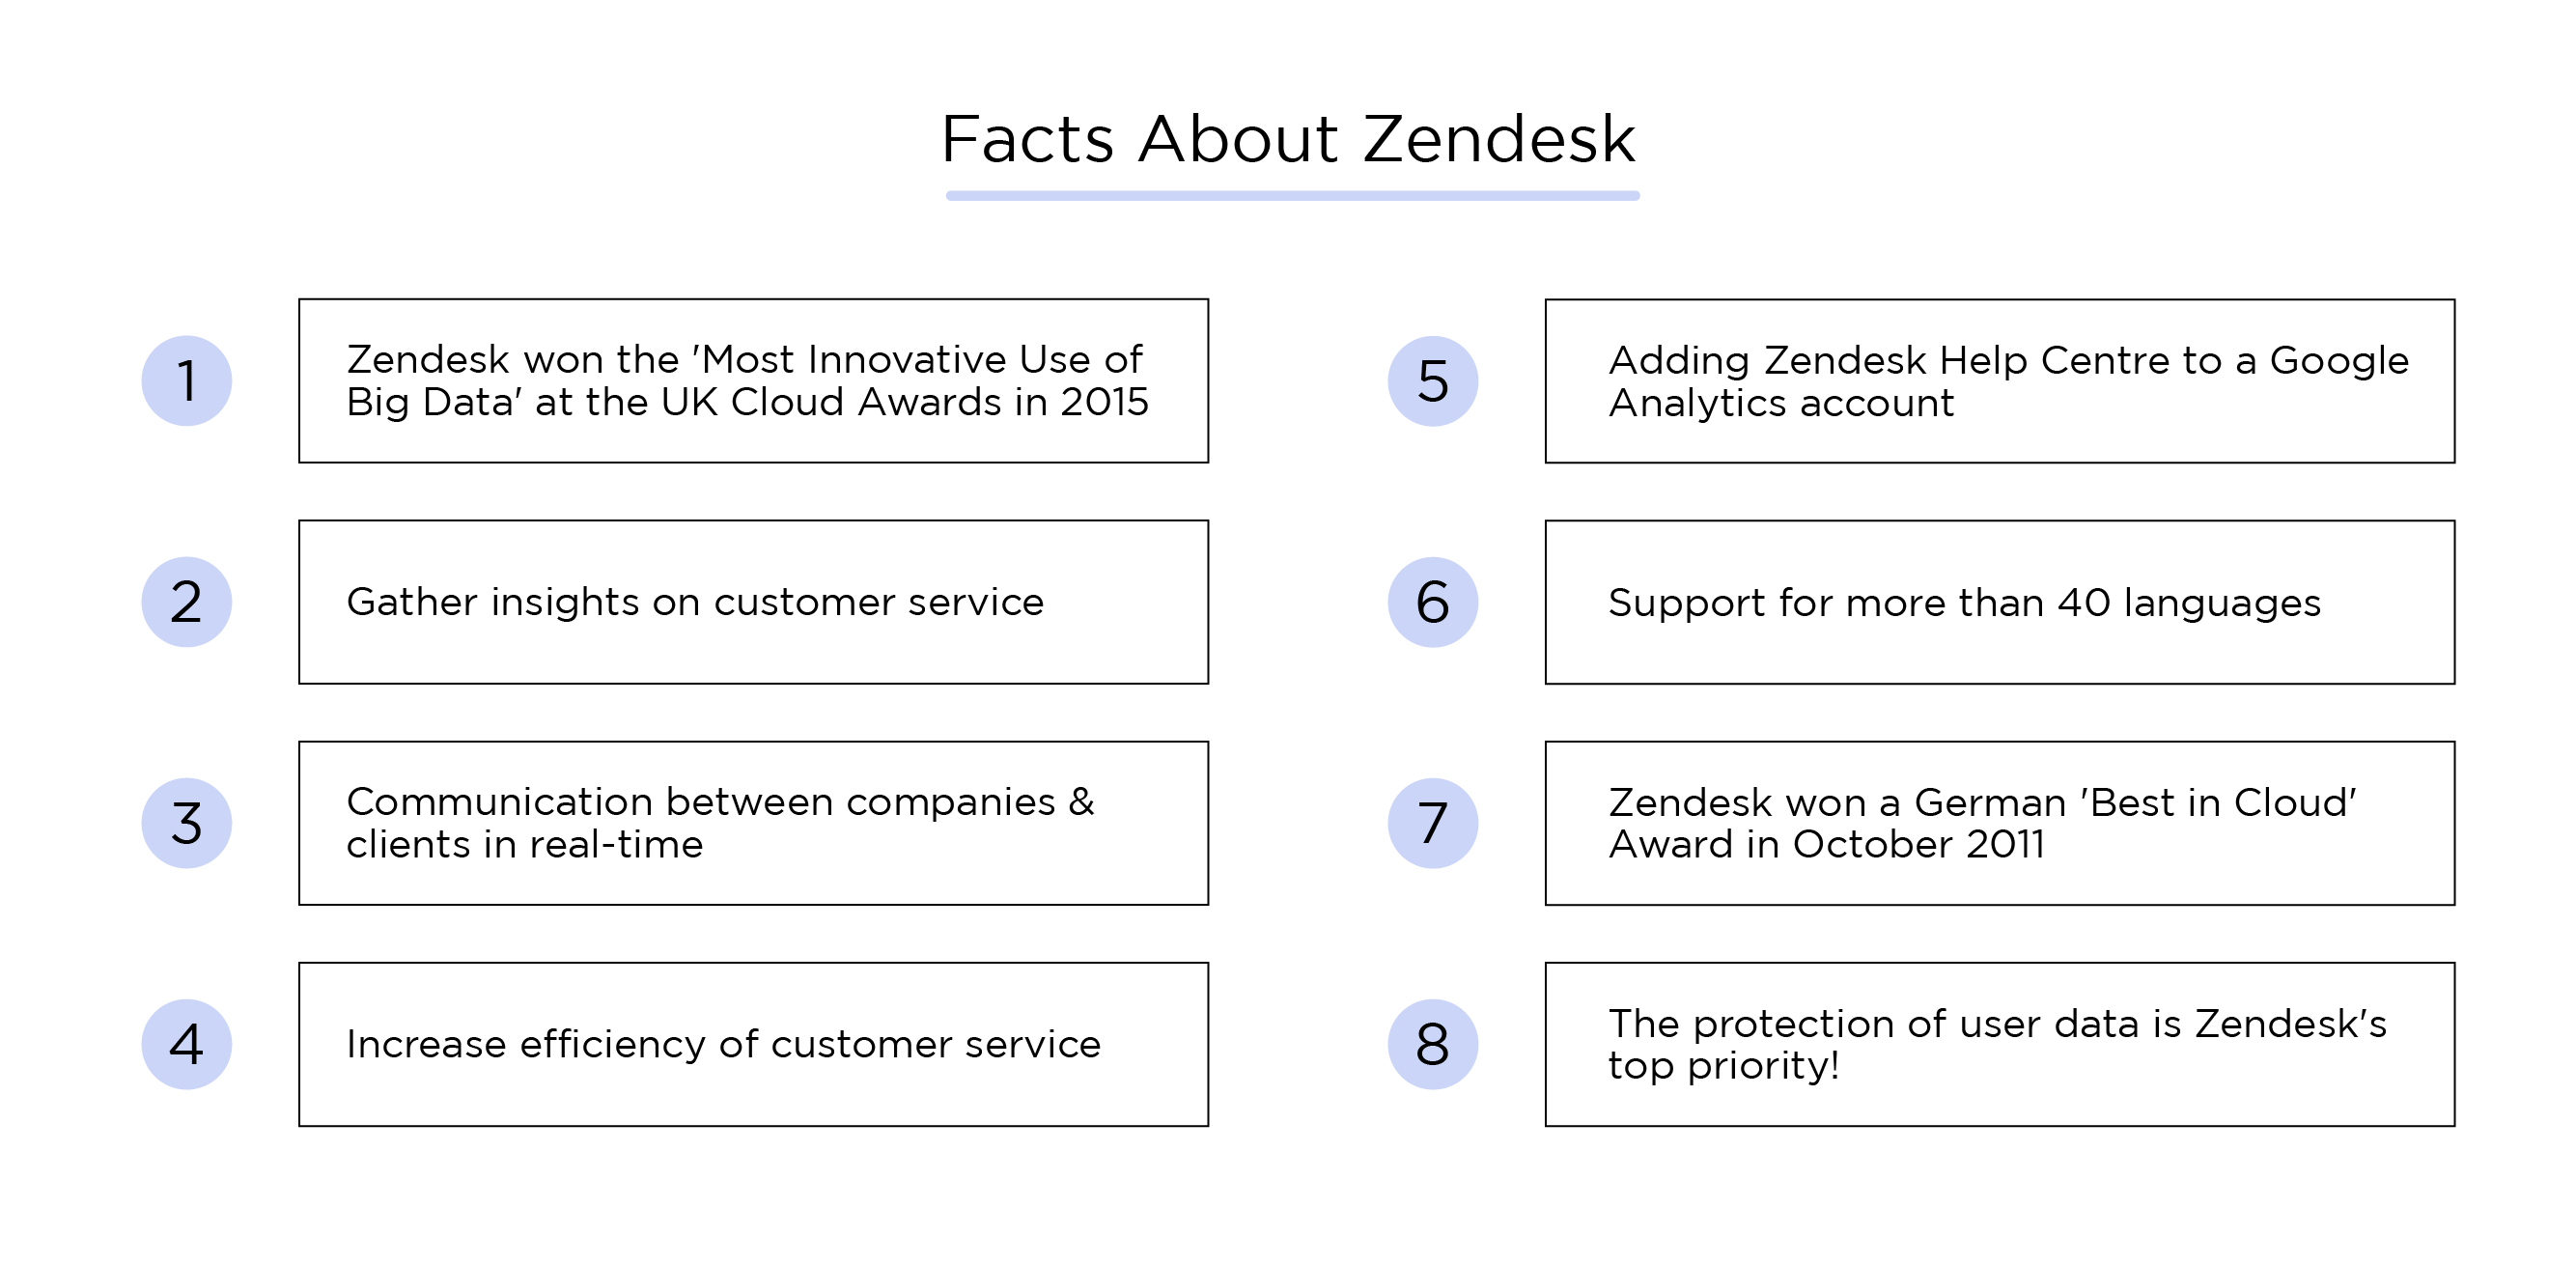 List Of 8 Astonishing Facts About Zendesk!